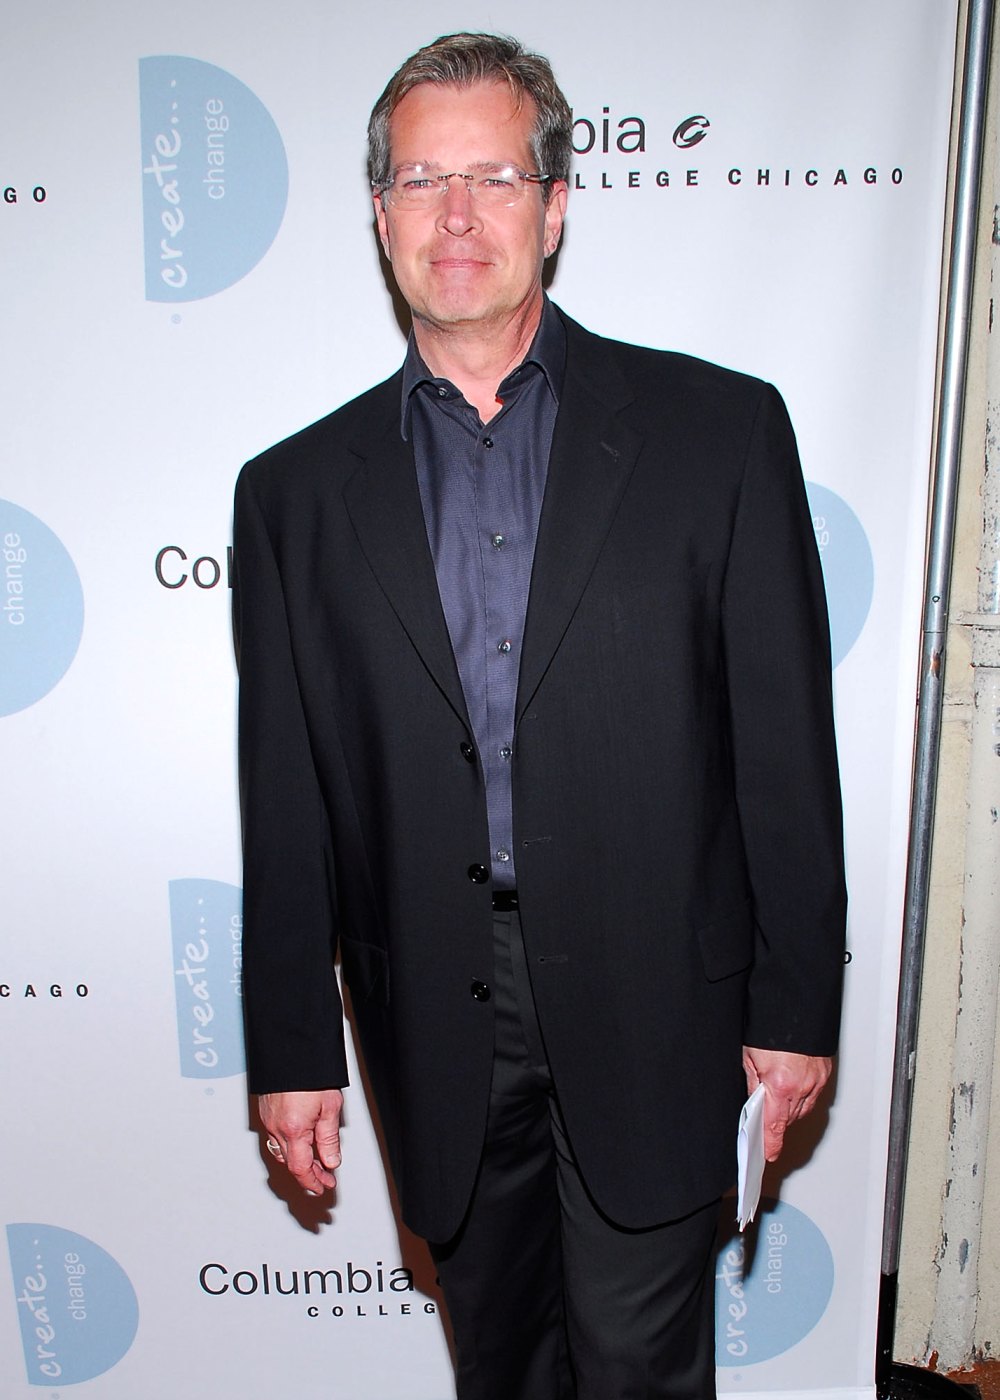 Why Did E! News’ Steve Kmetko Disappear From Hollywood in 2002? He Details Firing Experience